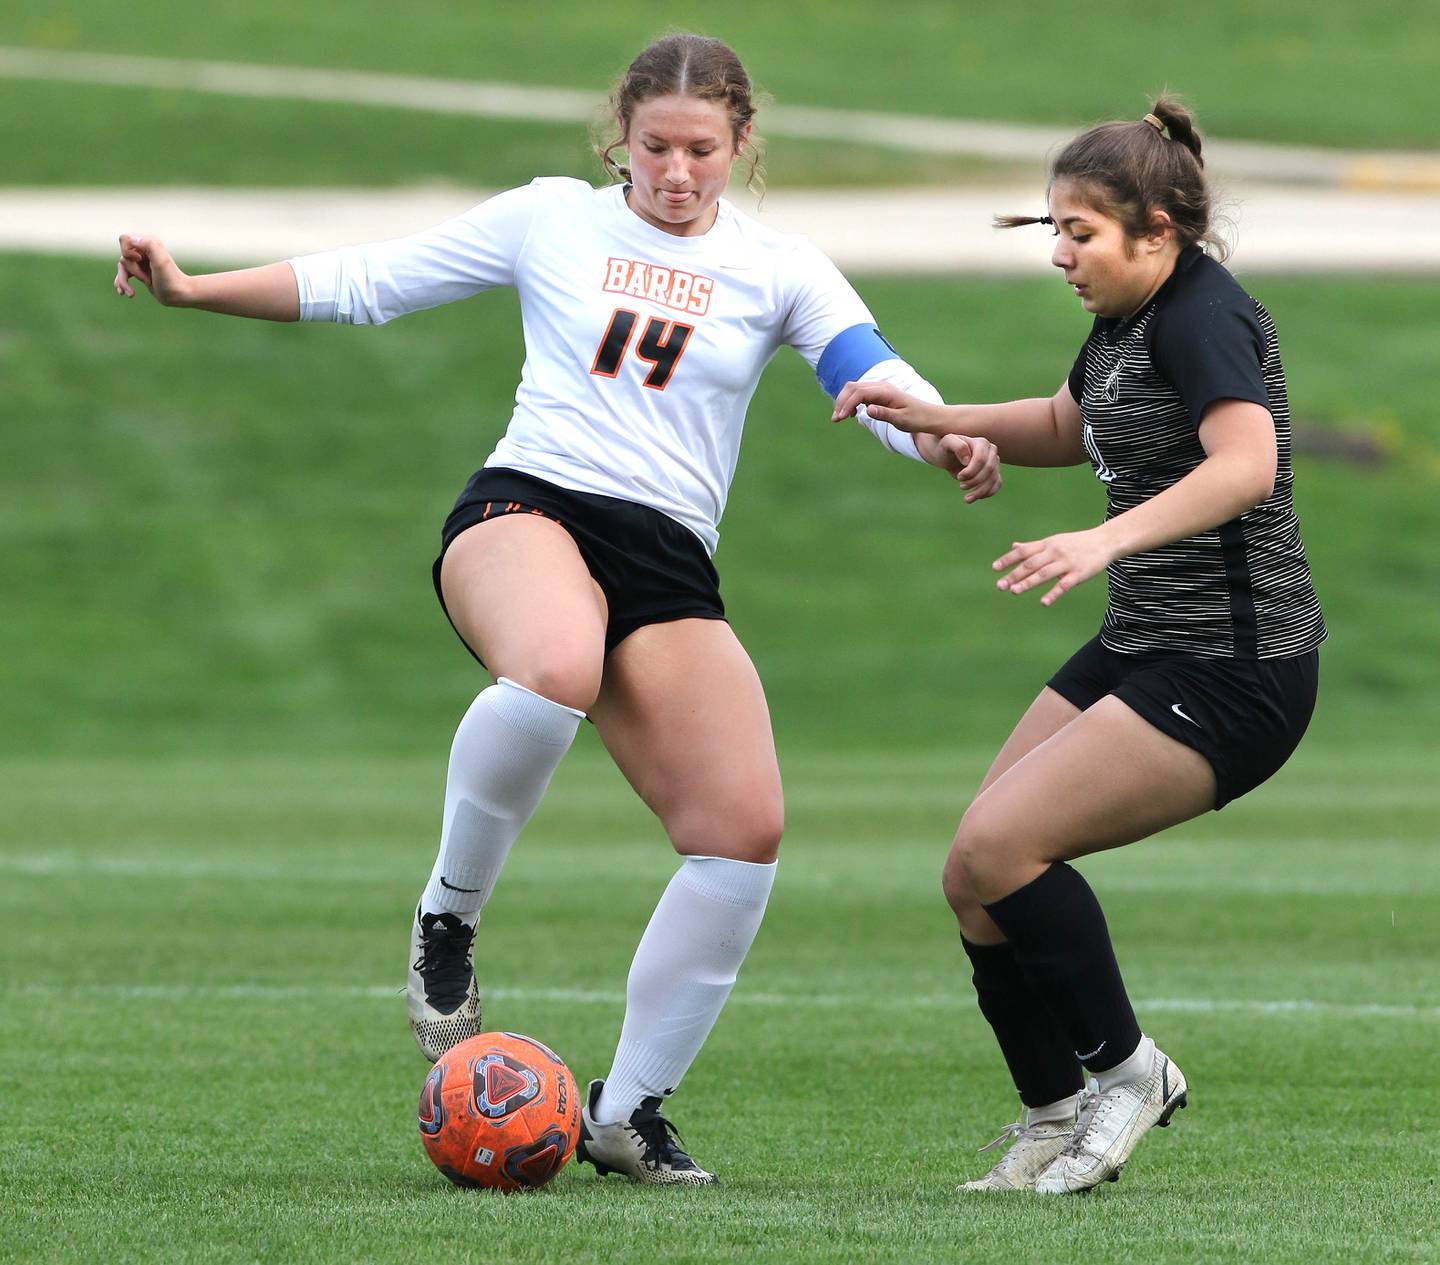 DeKalb's Natalie Rosenow and Sycamore's Mariana Martinez go after the ball during their game Monday, May 2, 2022, at Sycamore High School.